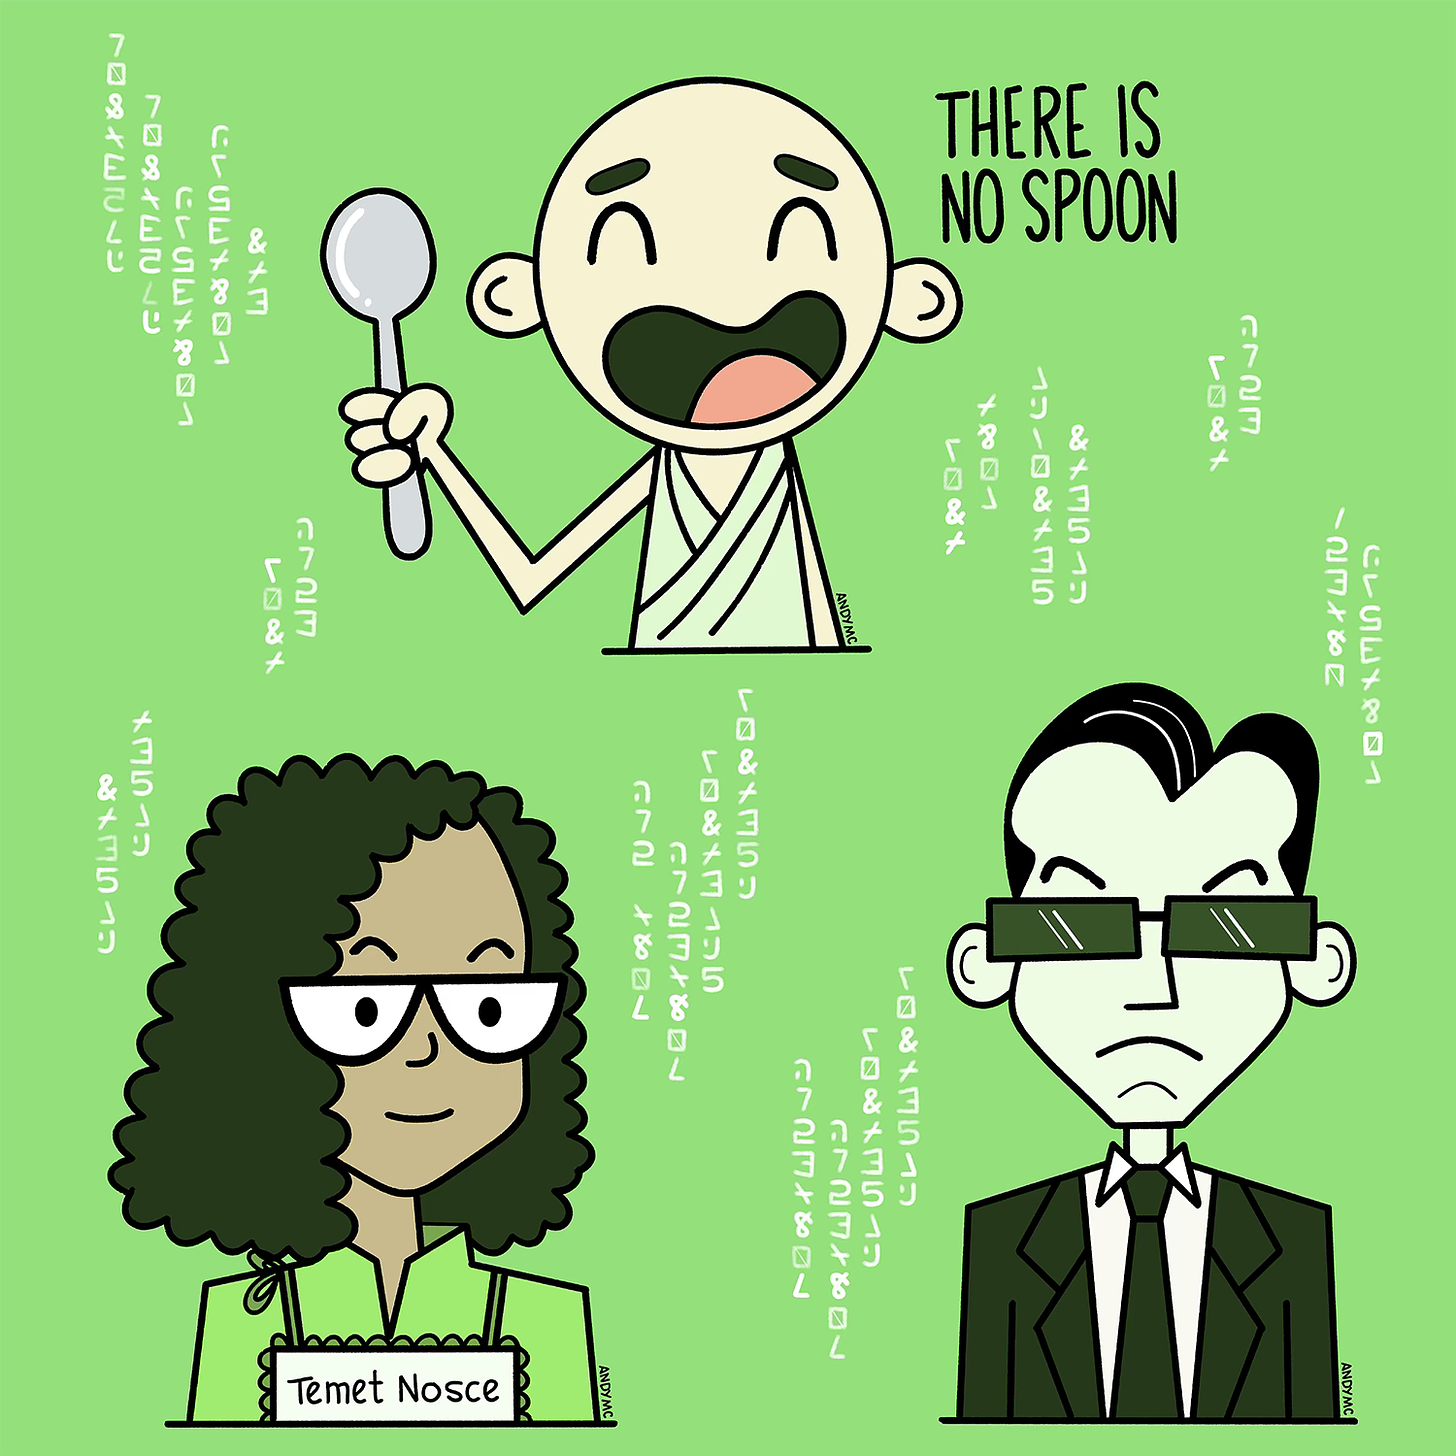 an illustration of characters from the Matrix movie